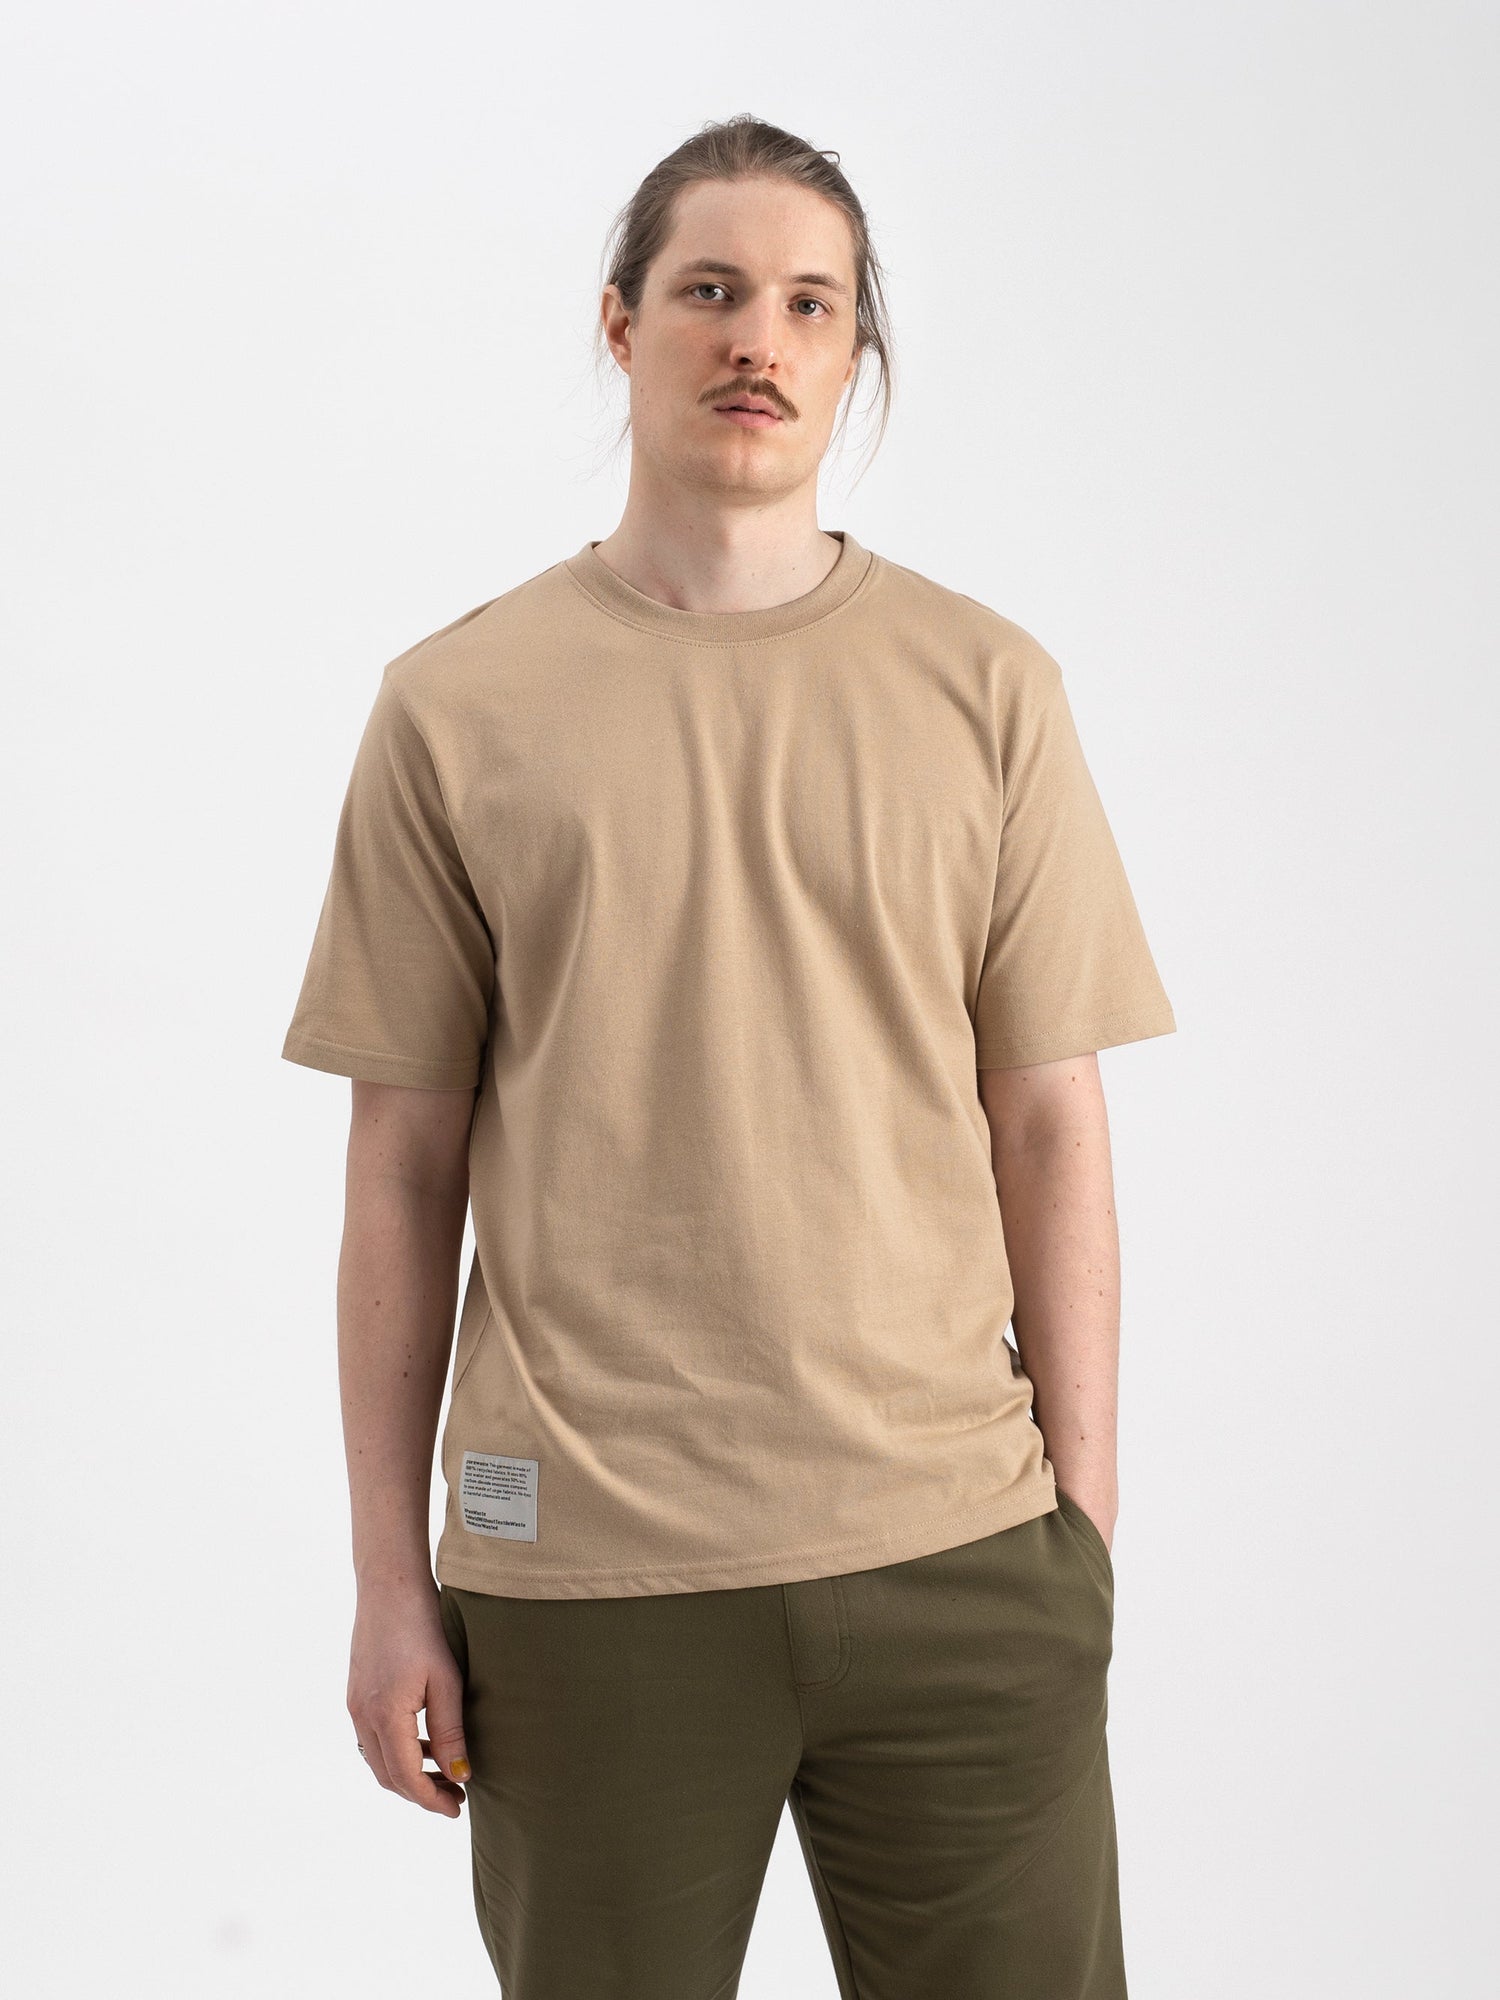 Pure Waste Unisex Loose Fit T-shirt - Recycled Cotton & Recycled Polyester Sand Shirt